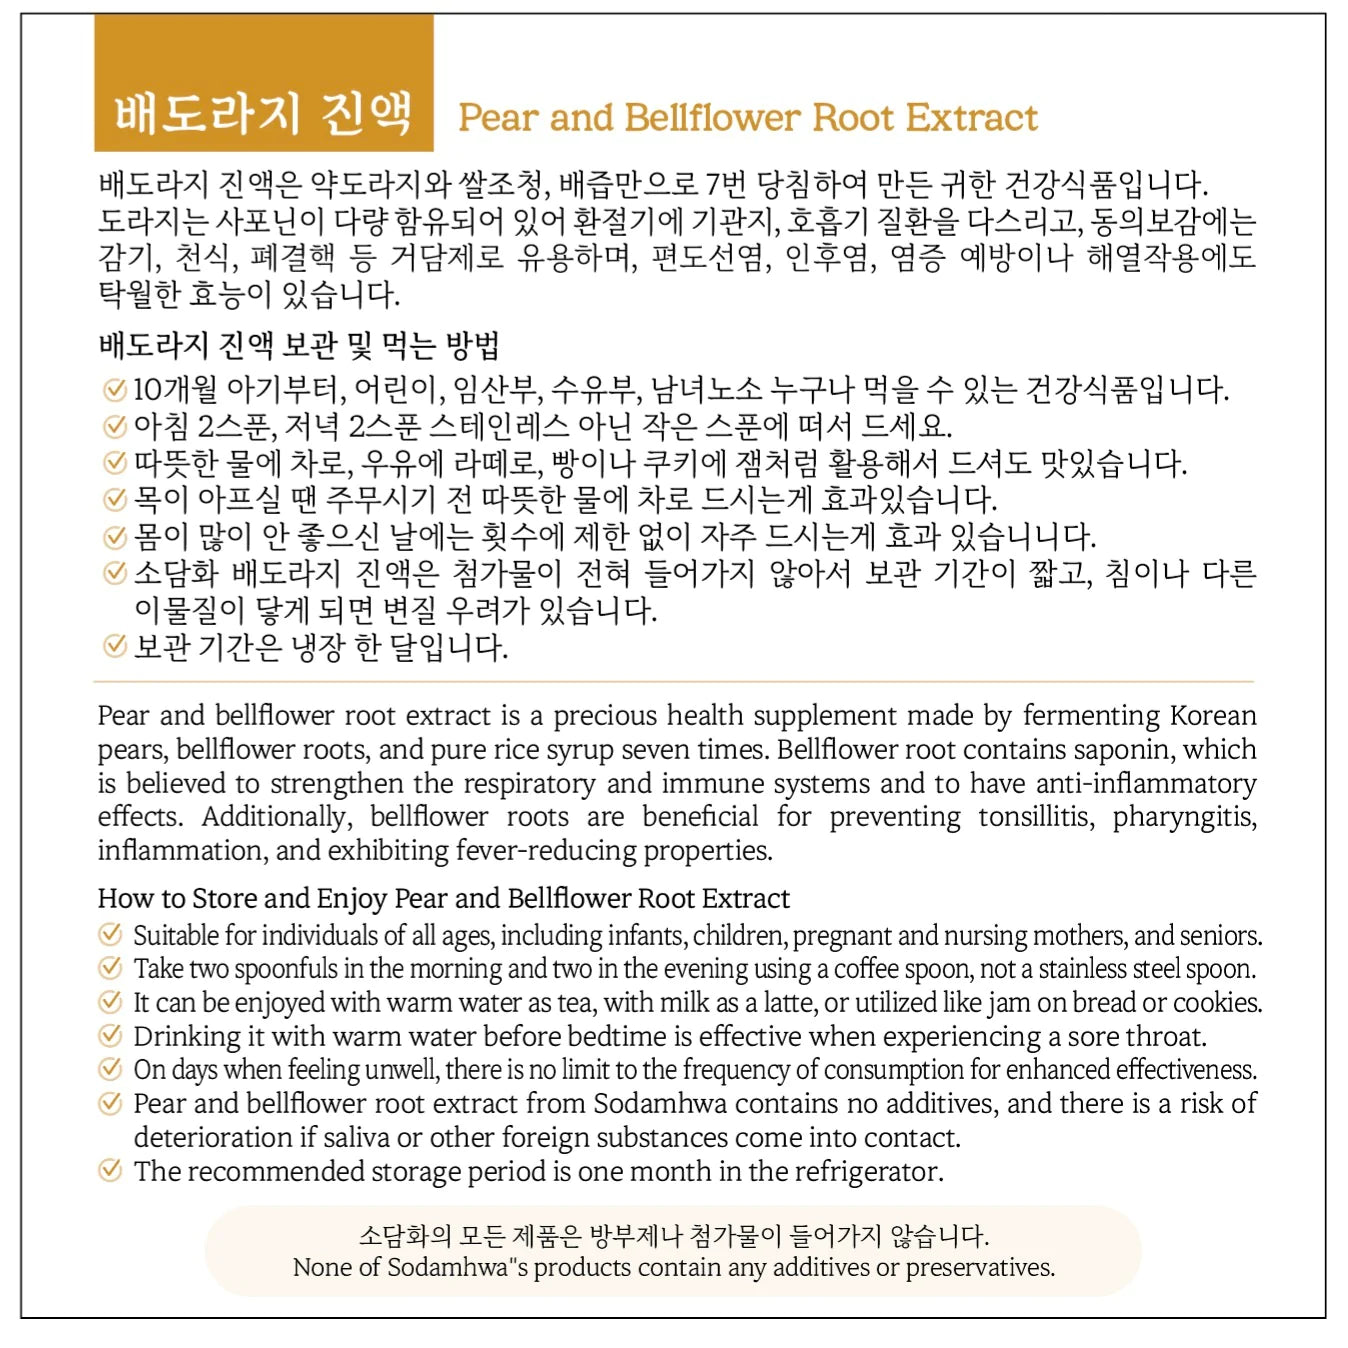 SODAMHWA Pear and Bellflower Root Extract 도라지 진액 300g